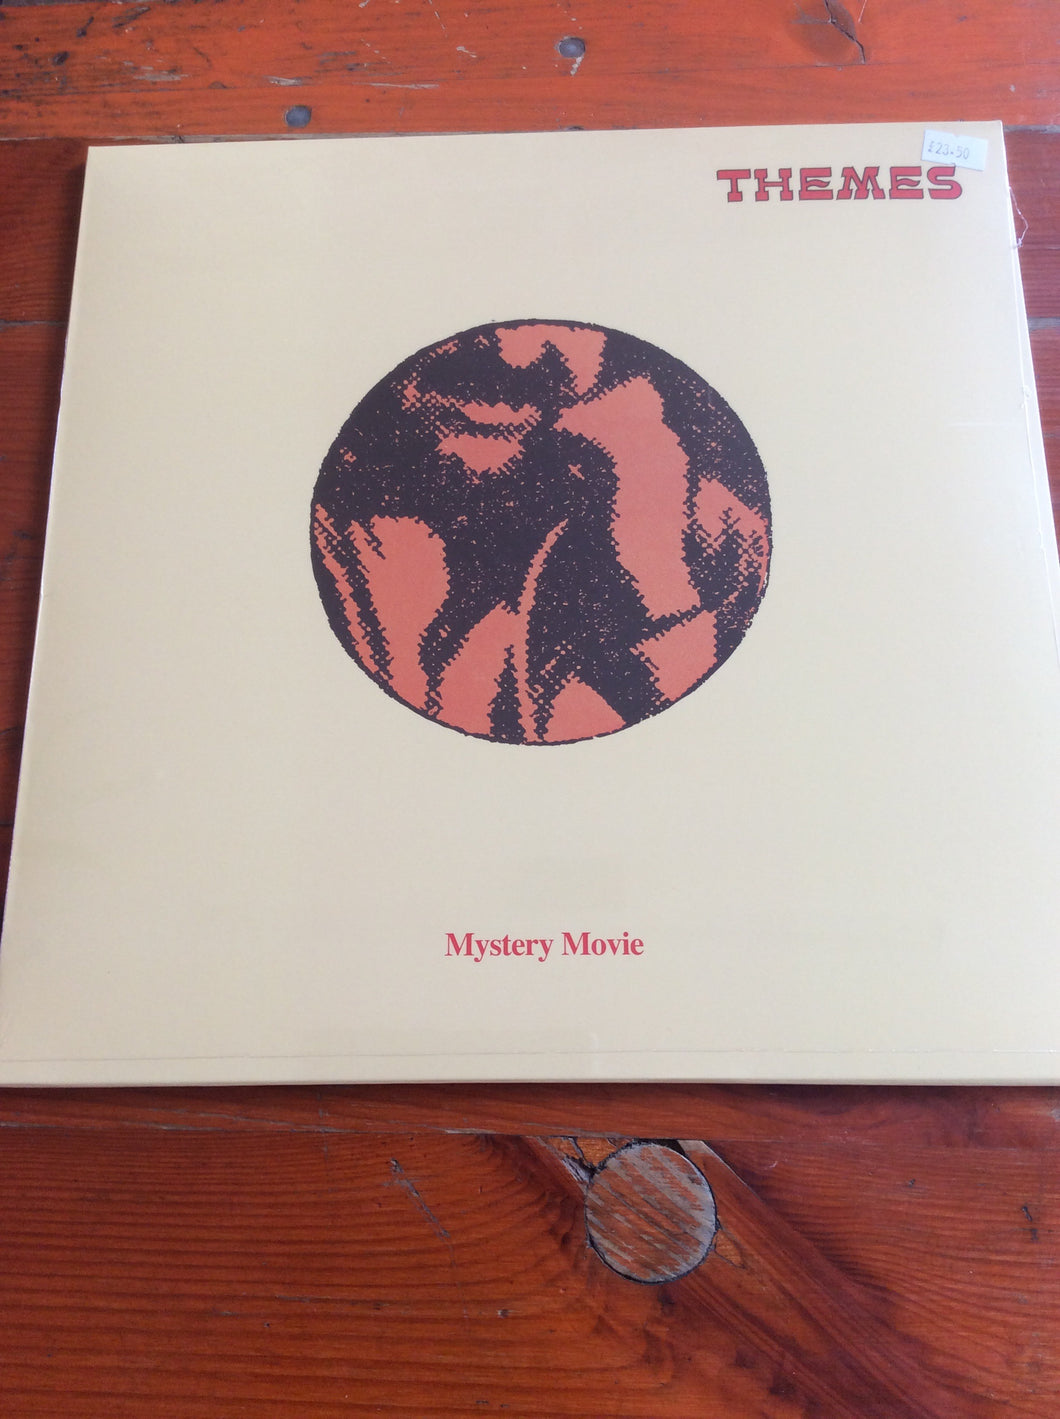 James Clarke - Mystery Movie LP (Themes Reissues)